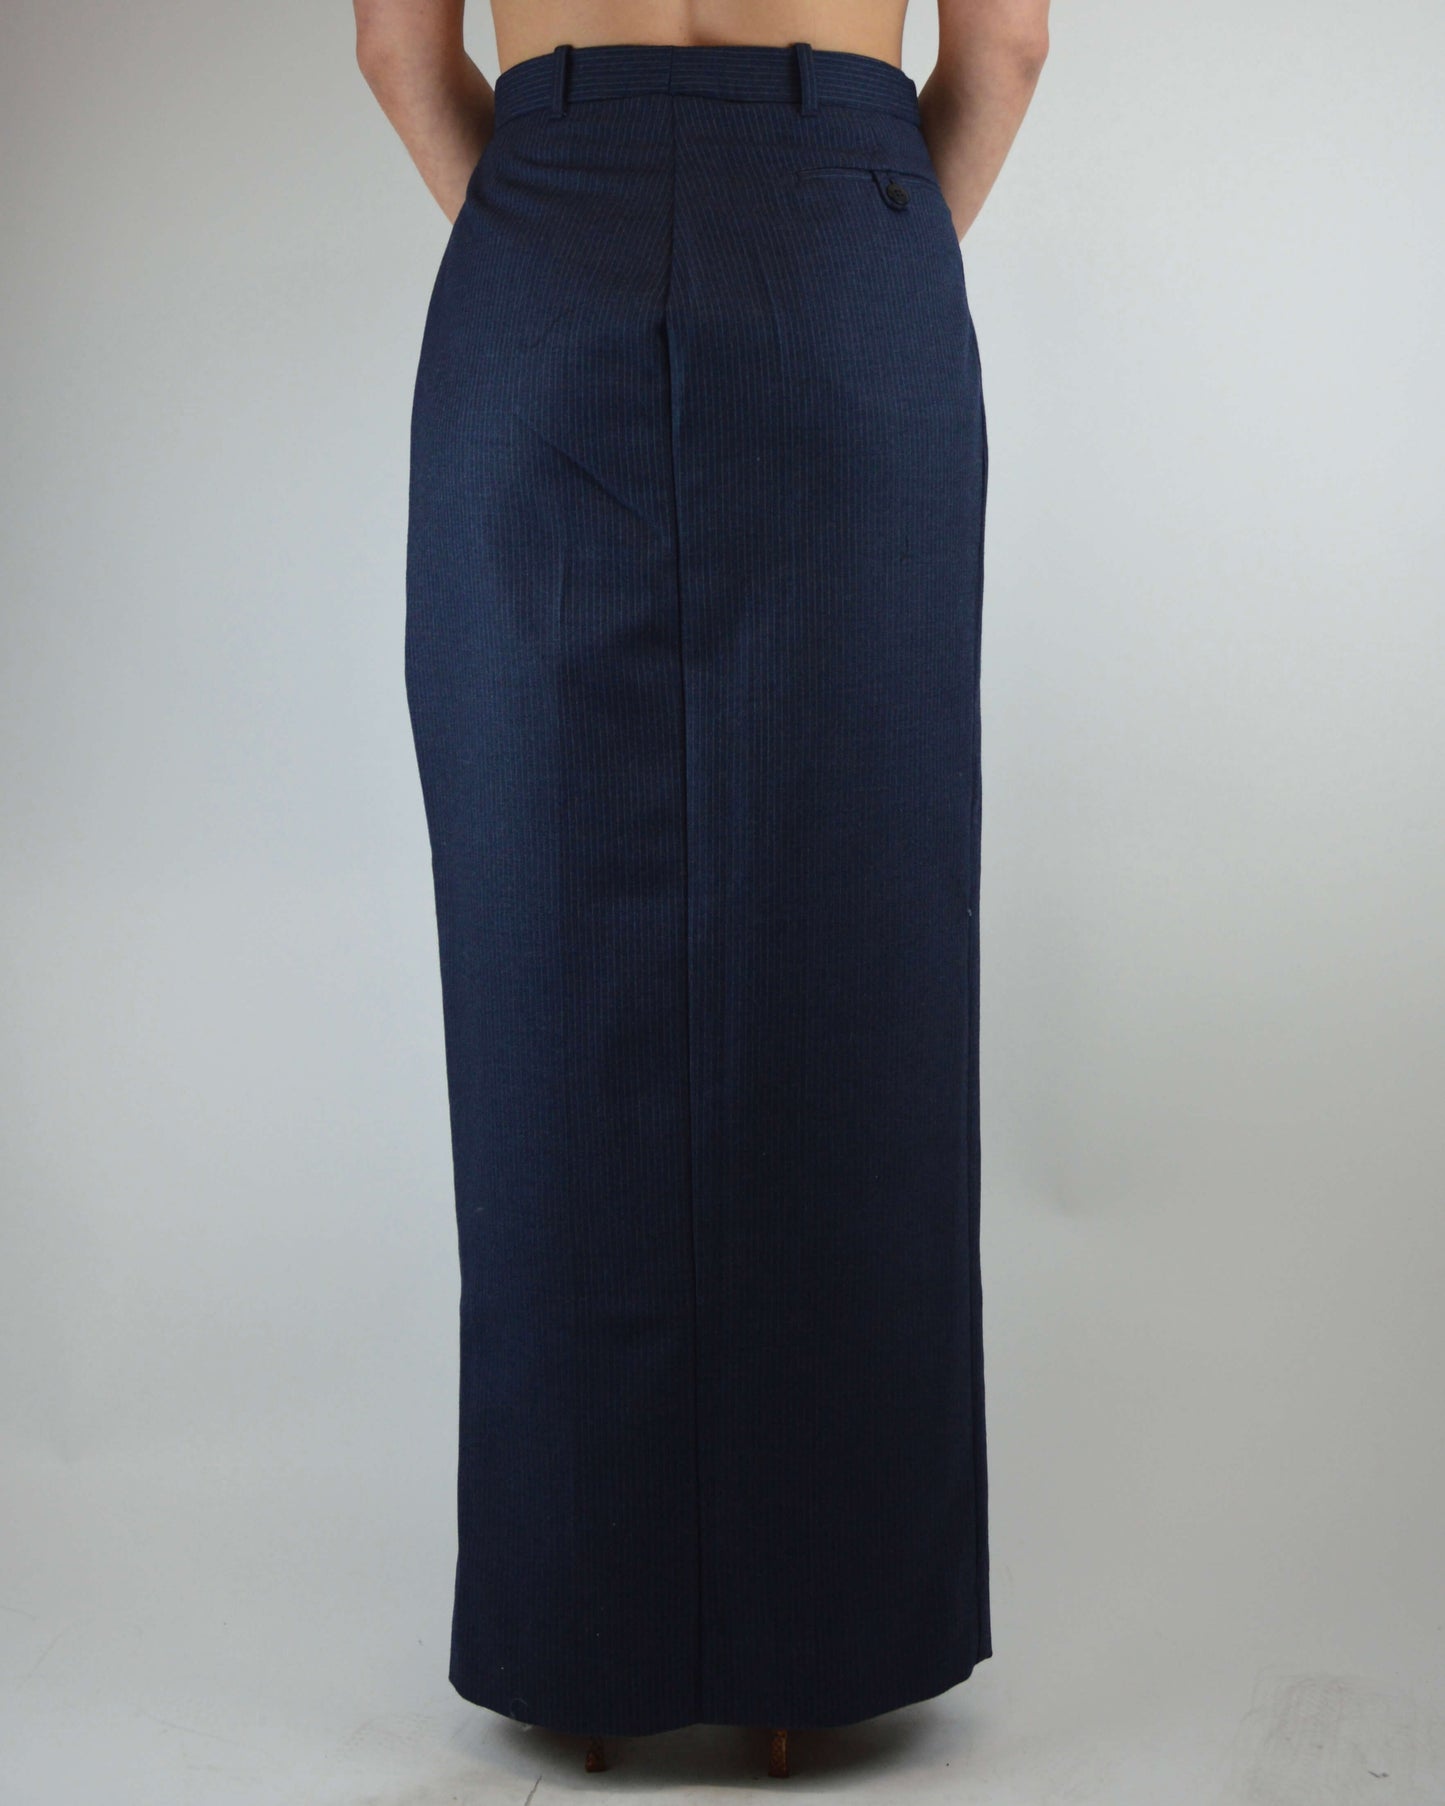 Long Skirt - Blue White Lines Thick (S/M)